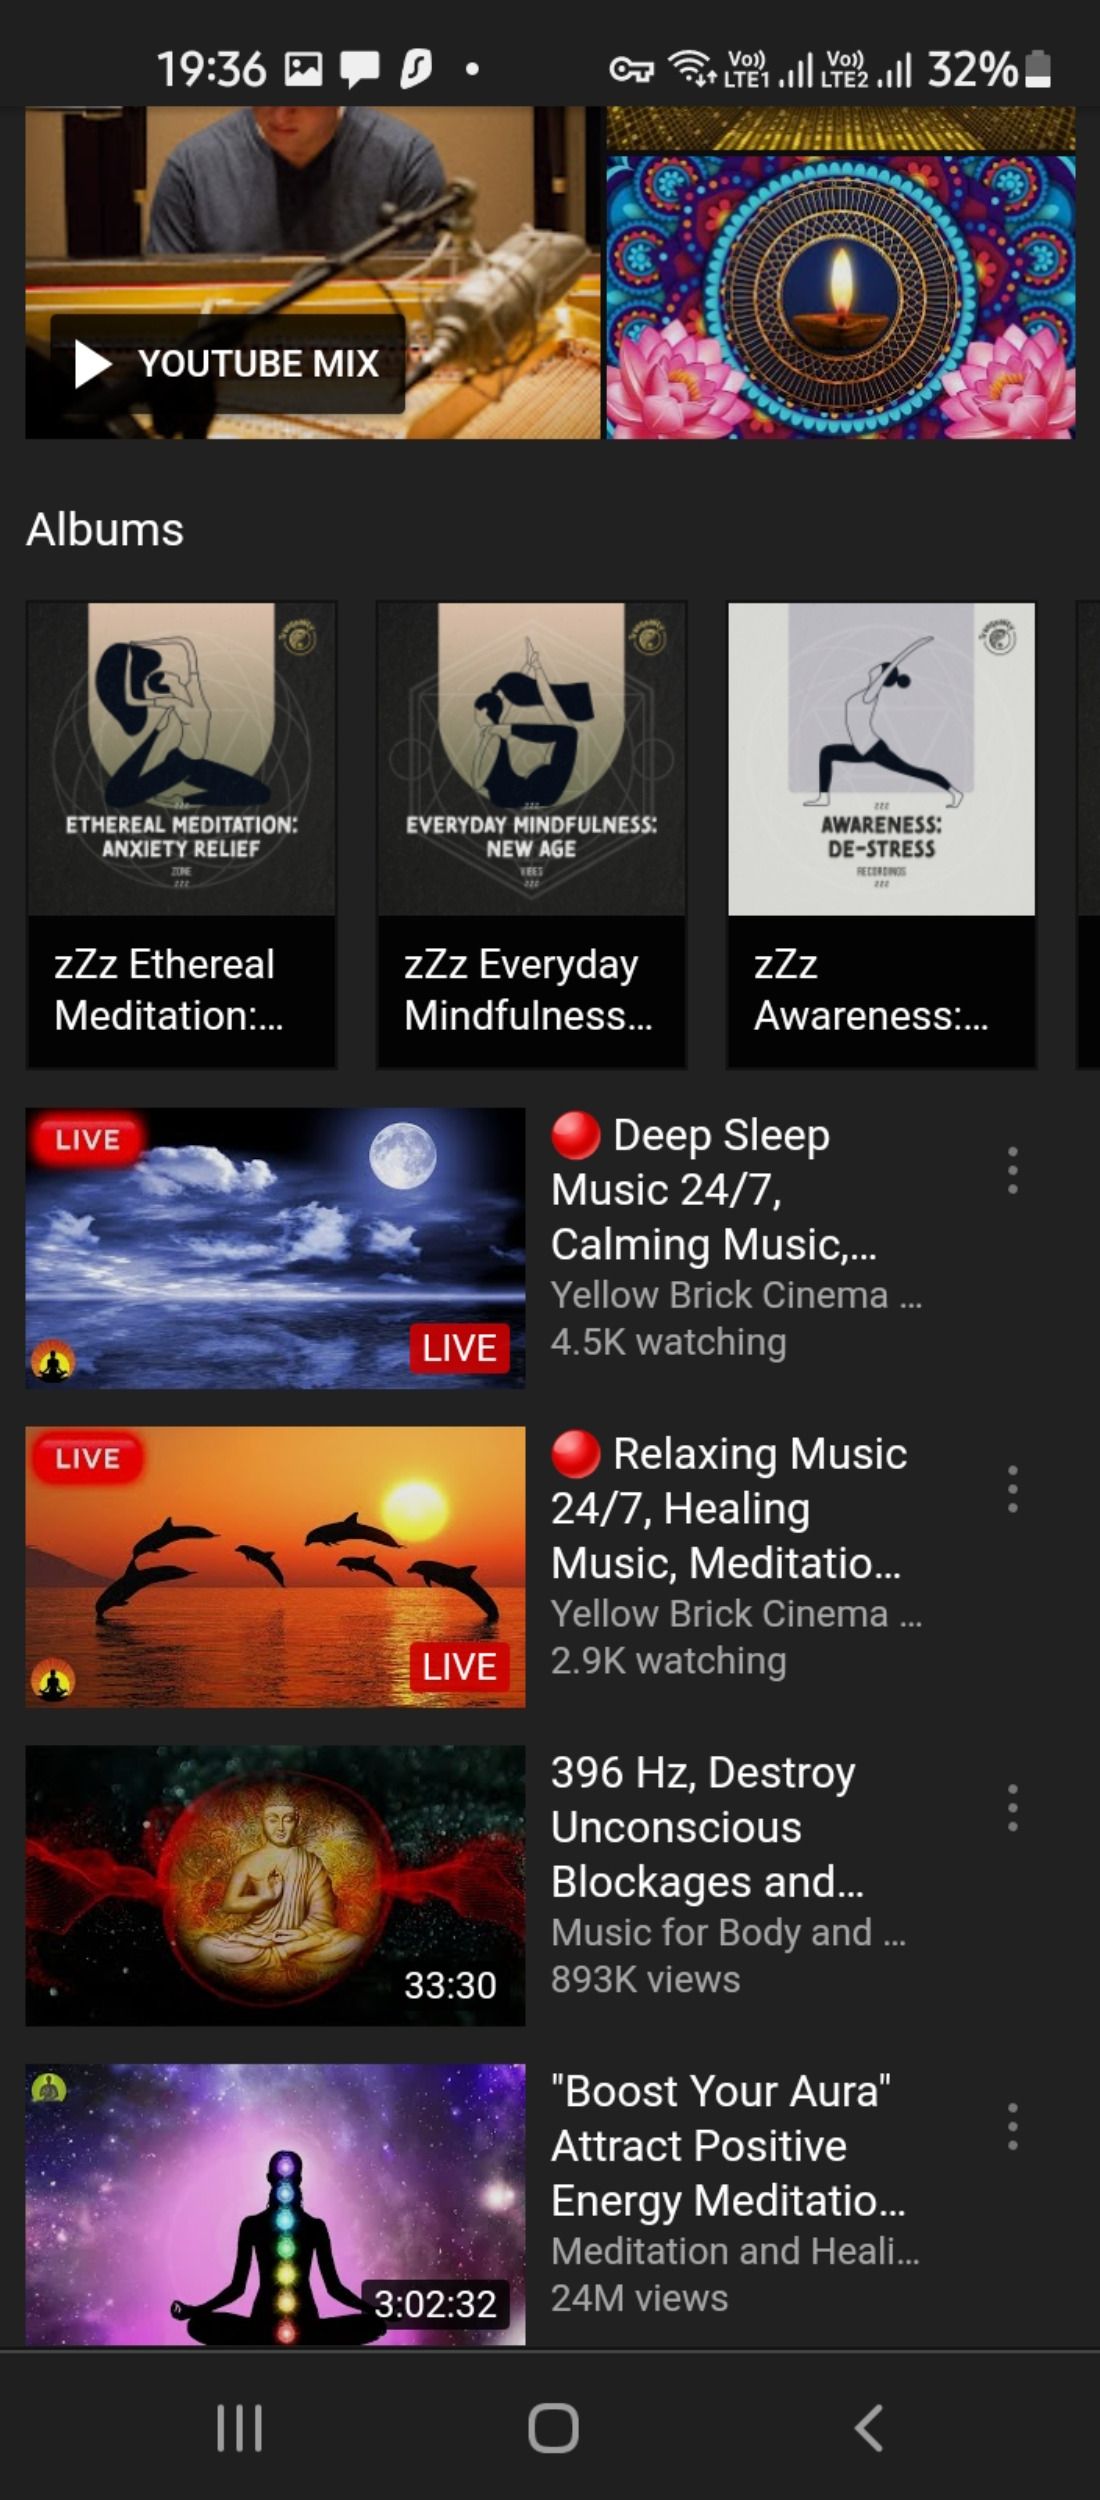 Music tracks and albums in the YouTube app